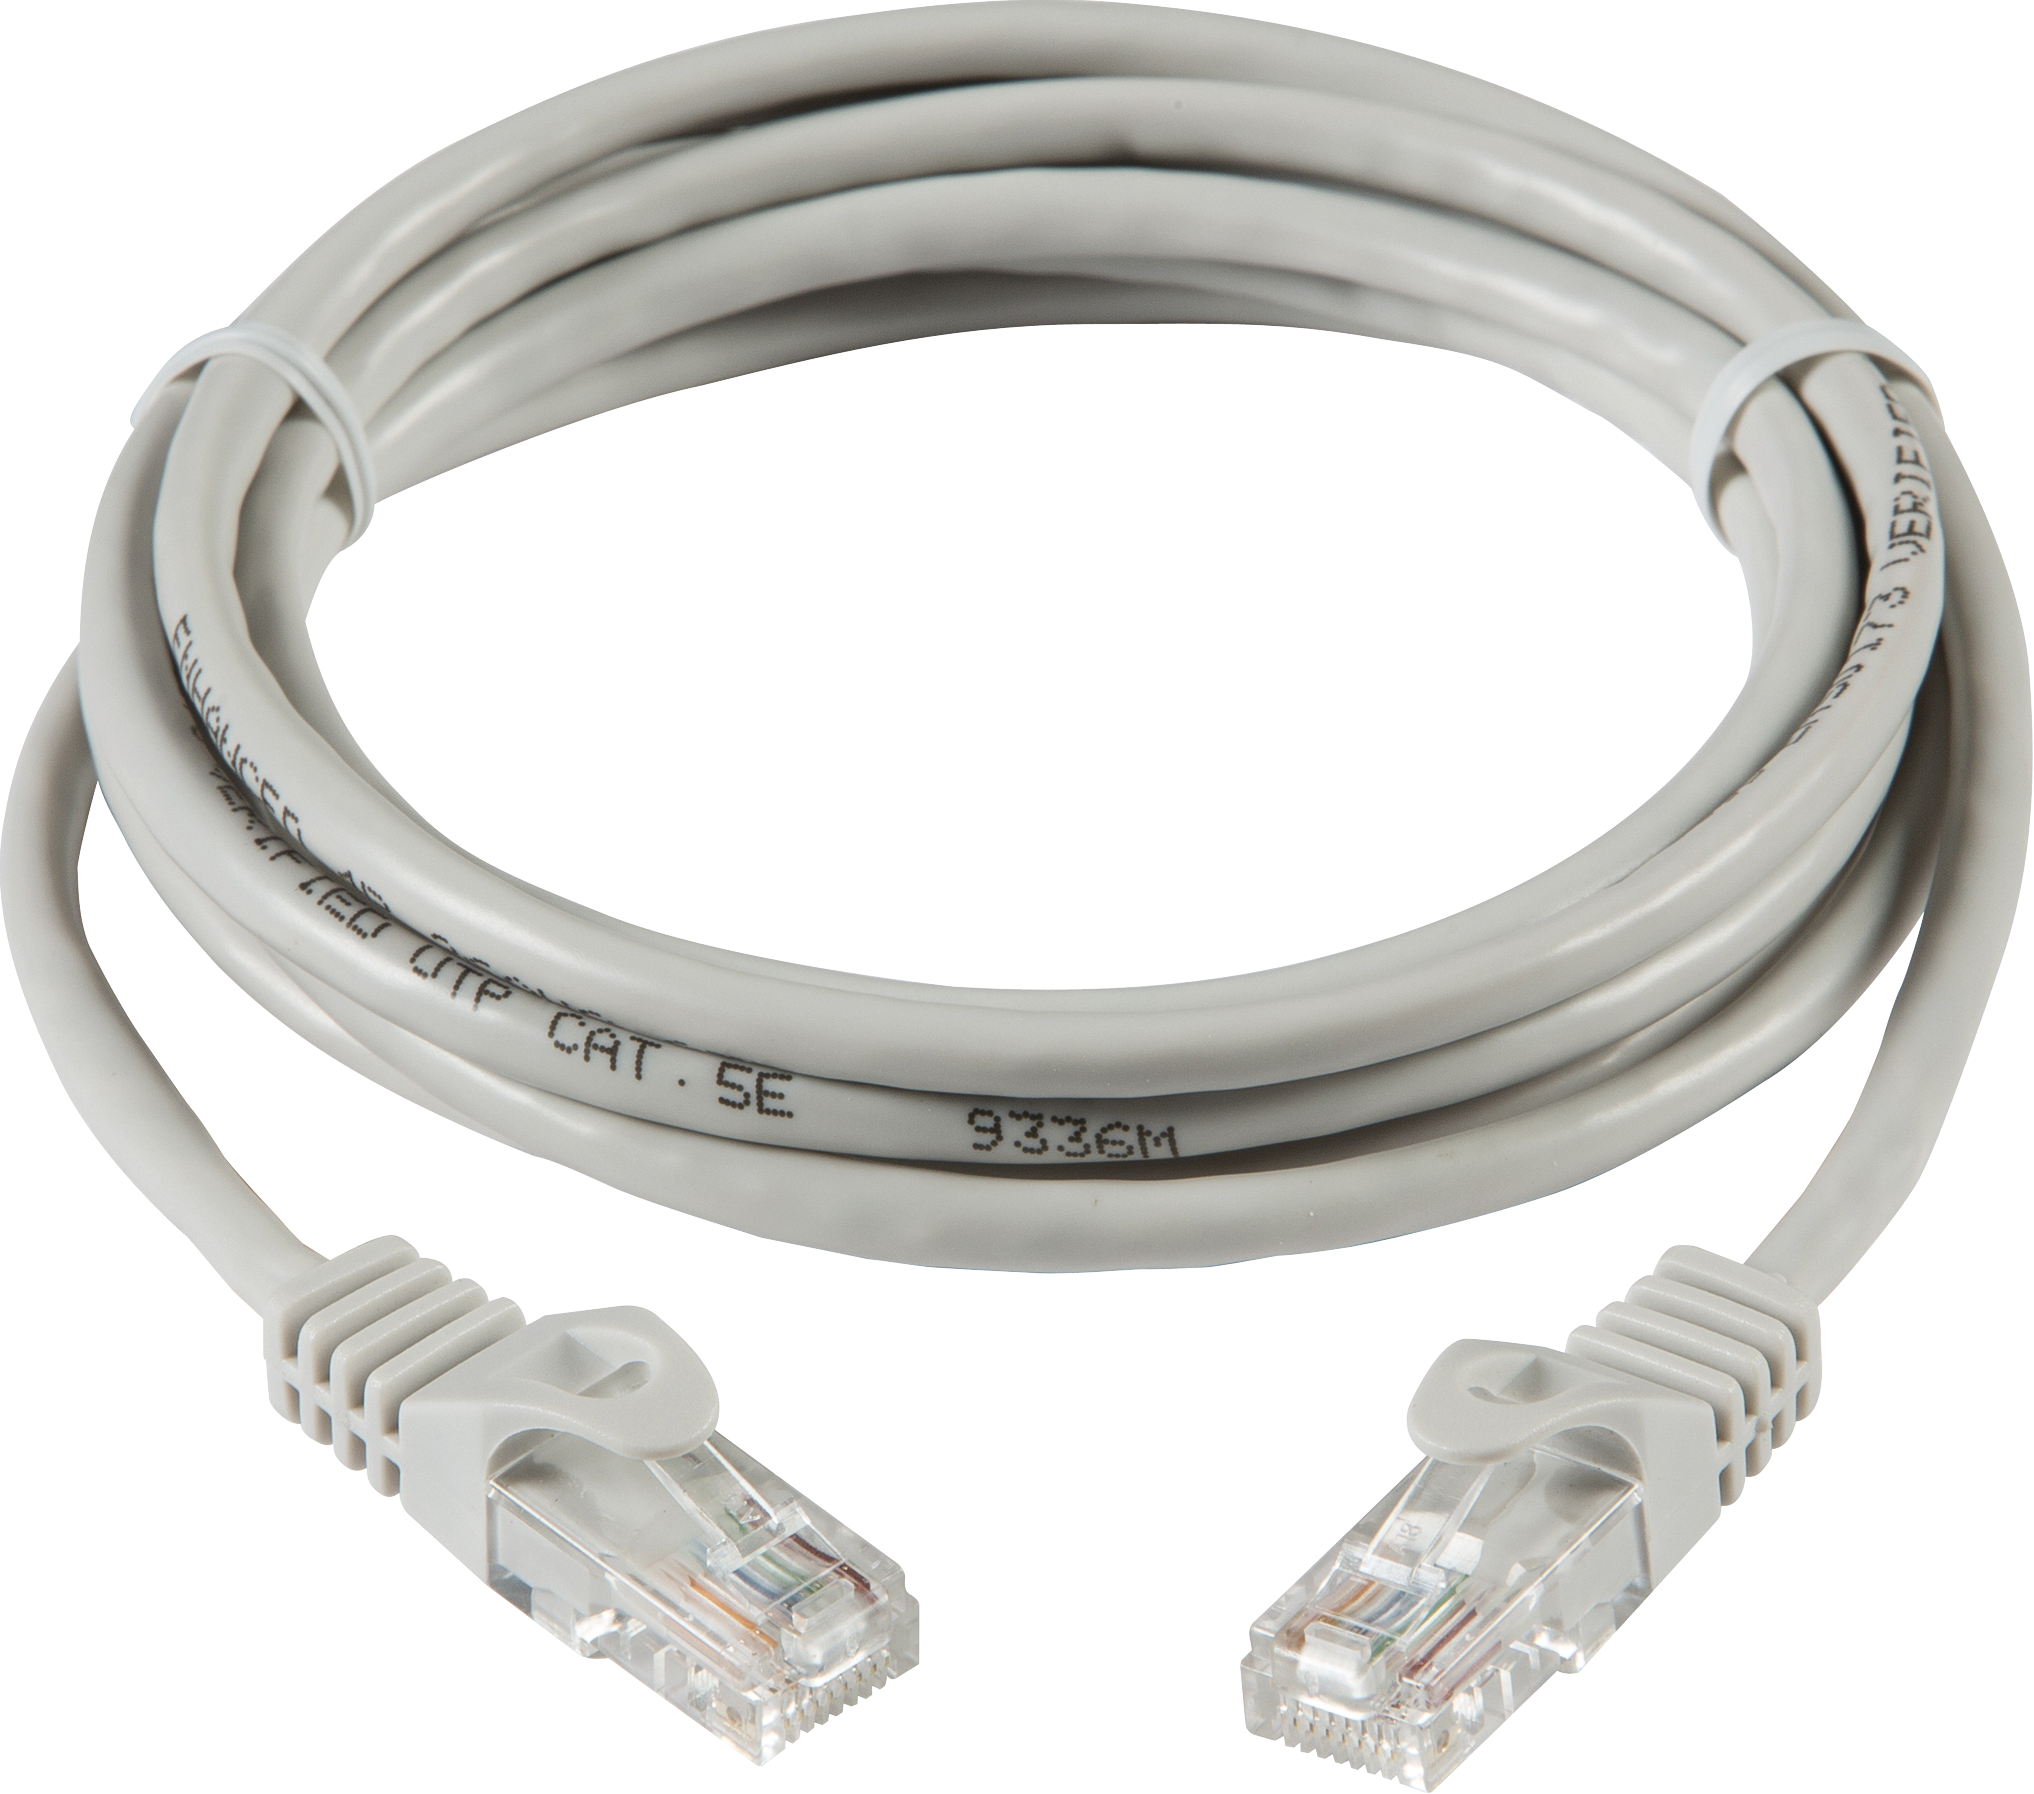 5m UTP CAT5e Networking Cable - Grey - NETC55M 